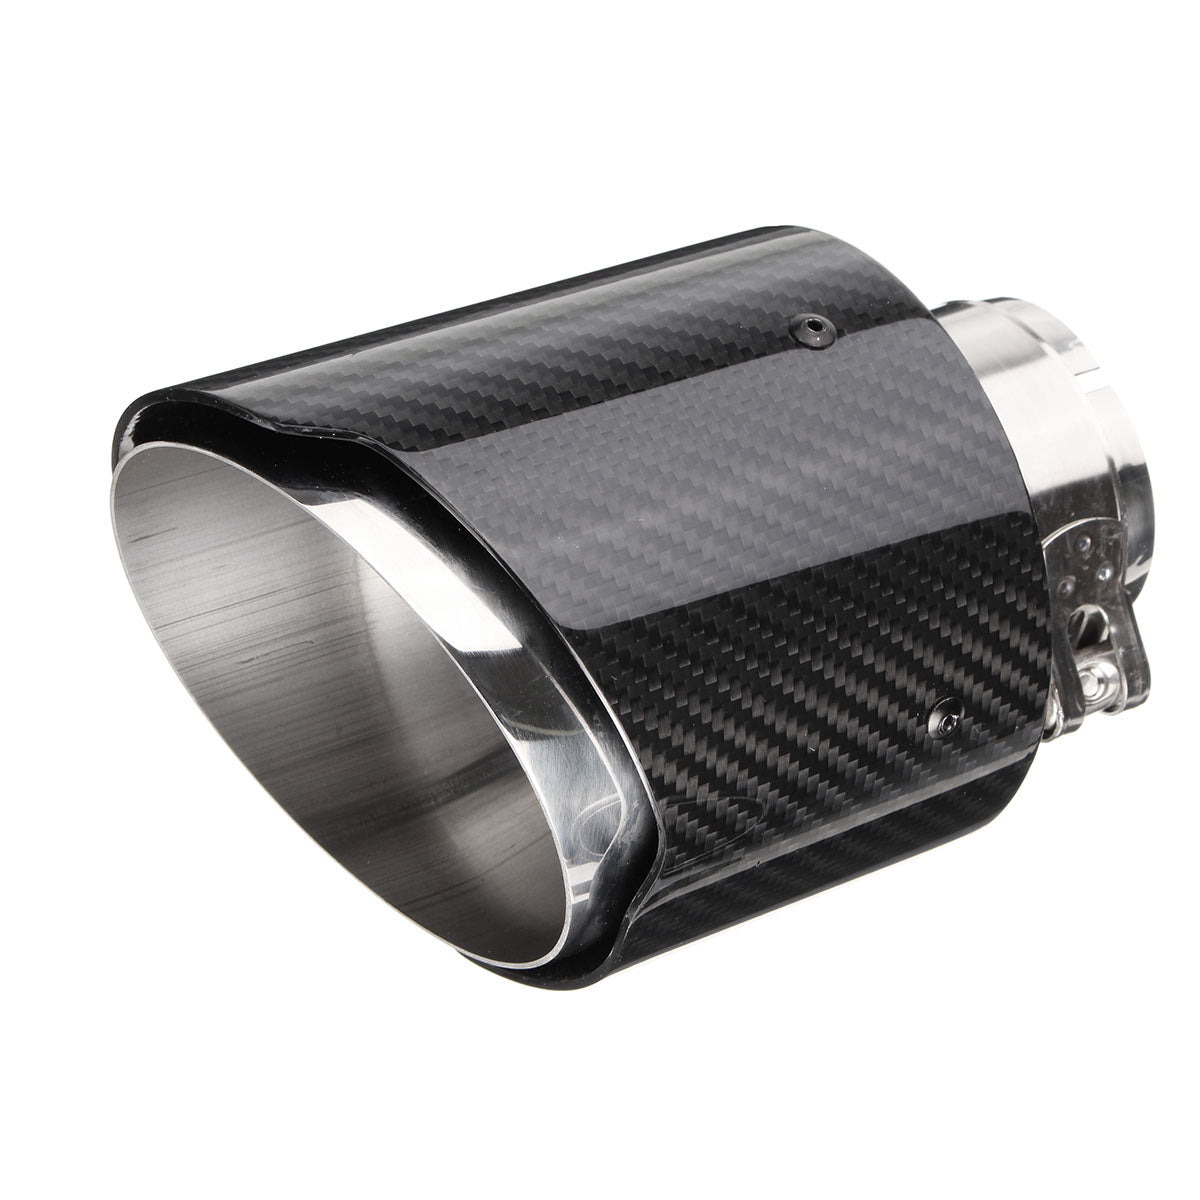 Slate Gray 2.6 Inch 66 to 114mm Universal Carbon Fiber Car Auto Exhaust Pipe Tail Muffler End Tip